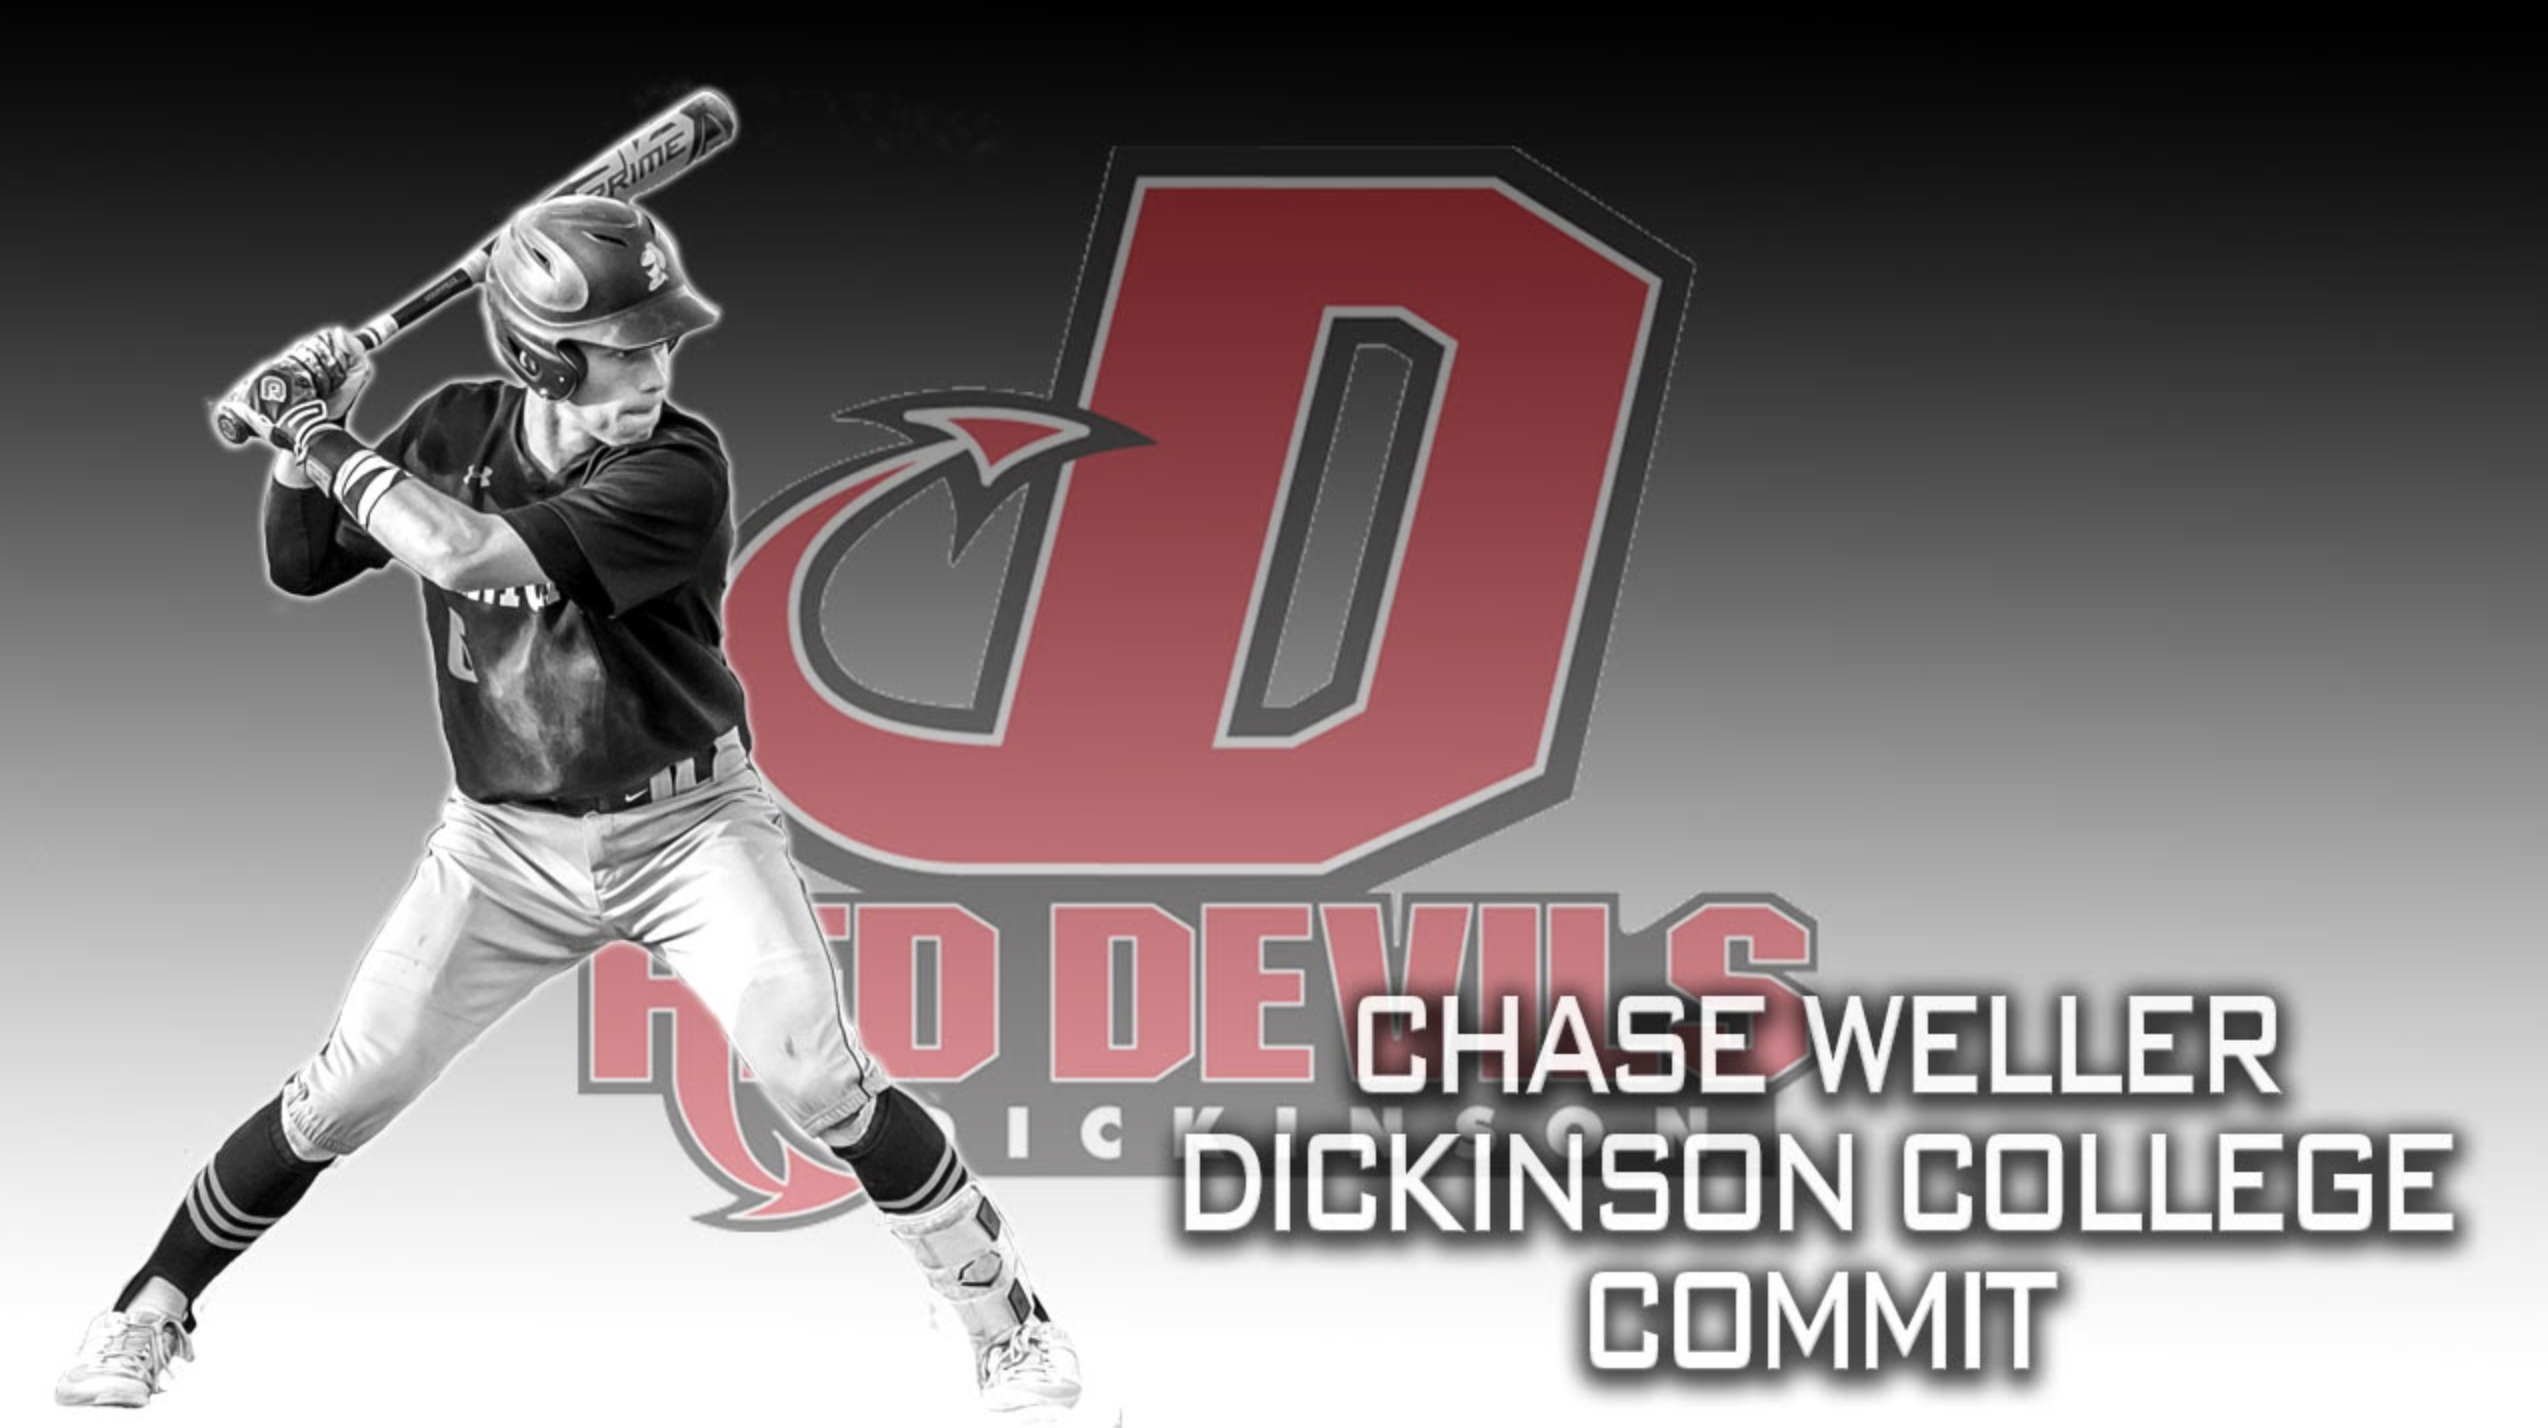 Chase Weller’s Story – Committed to Dickinson College